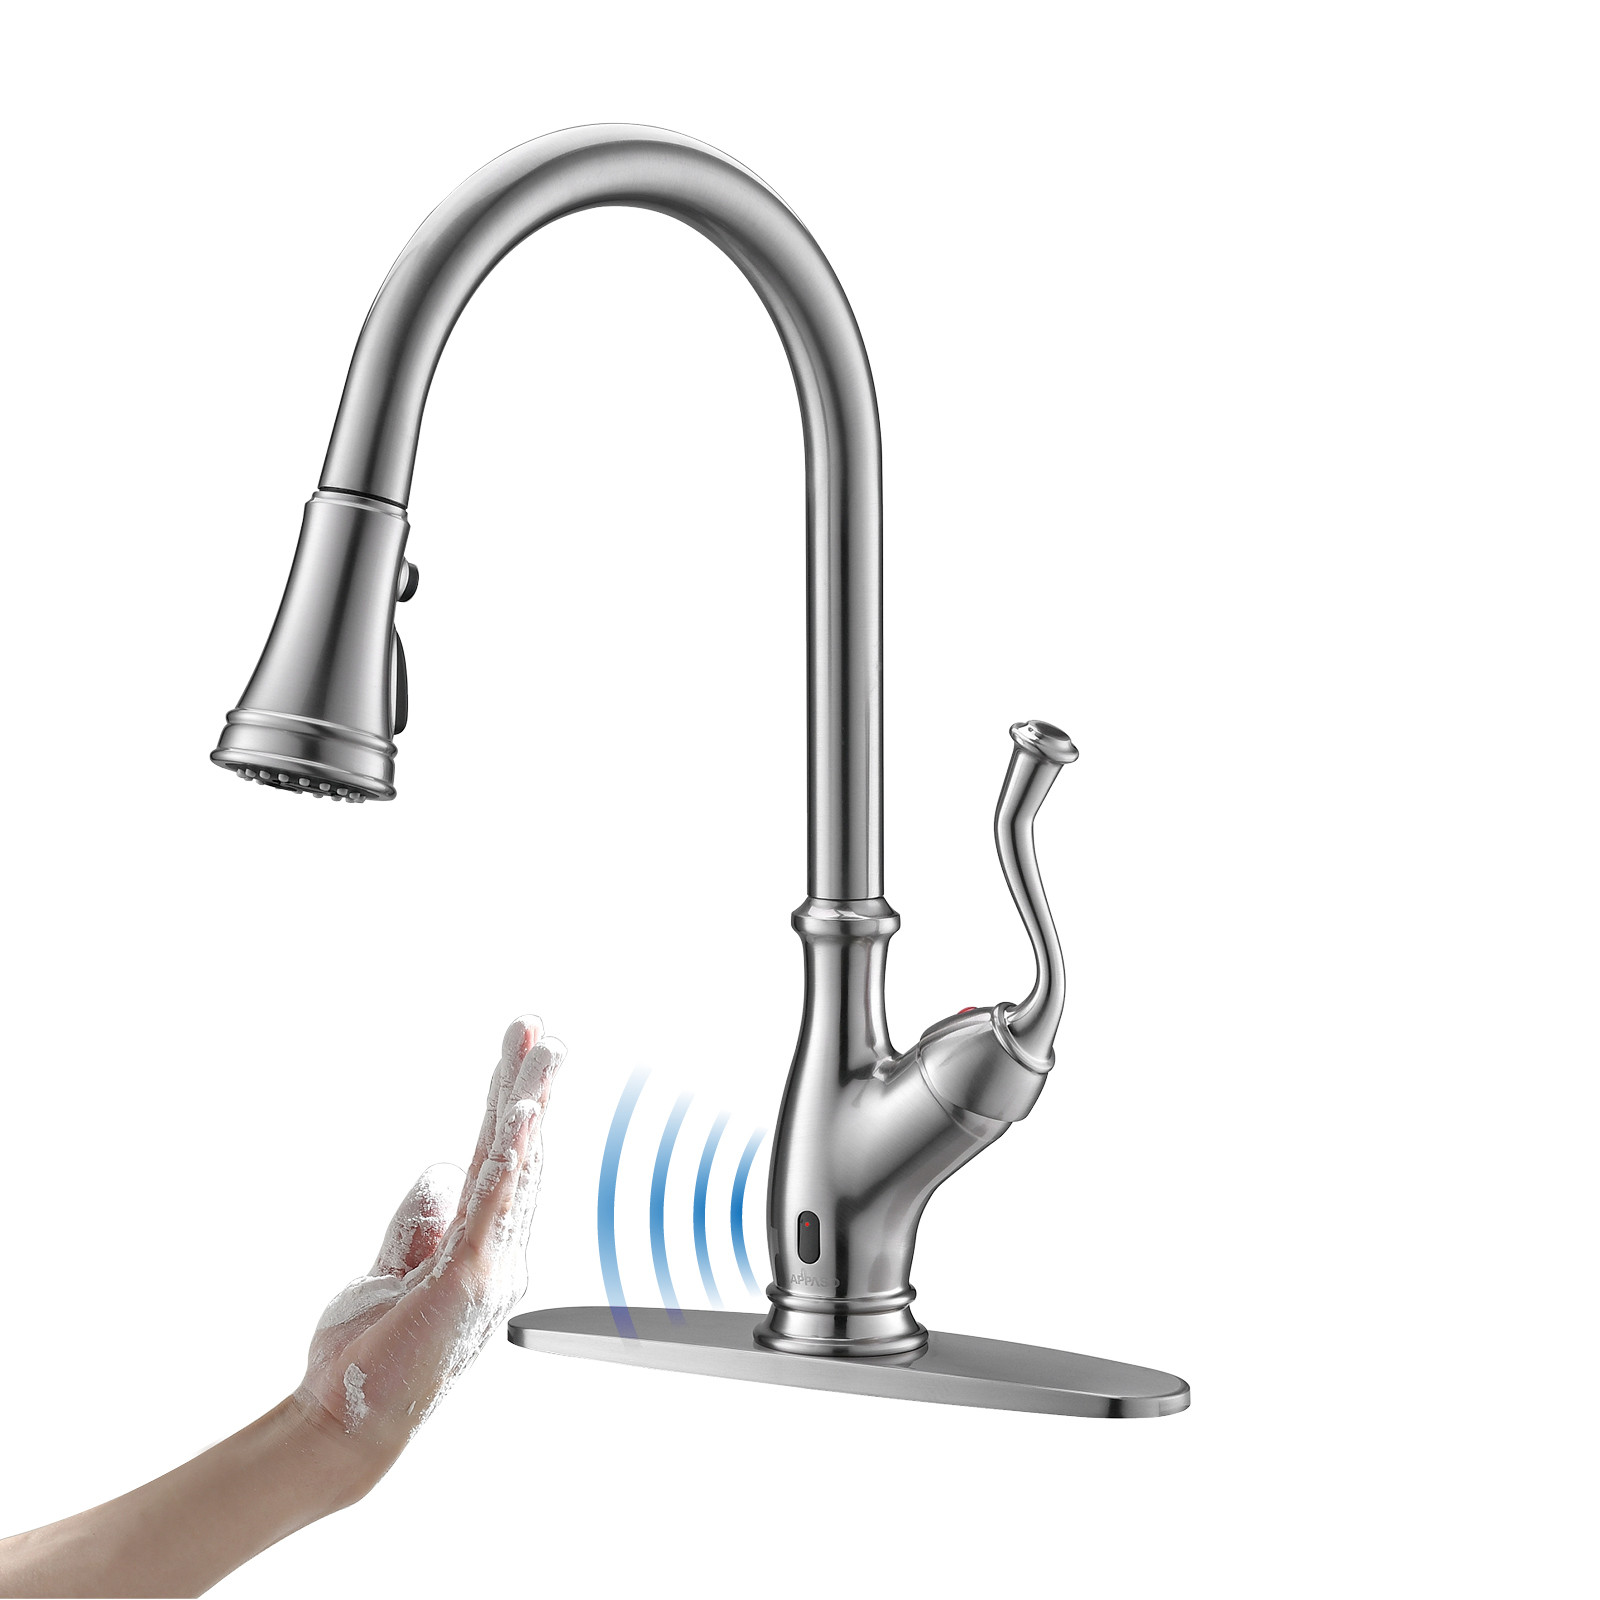 How Do Touchless Kitchen Faucets Work?